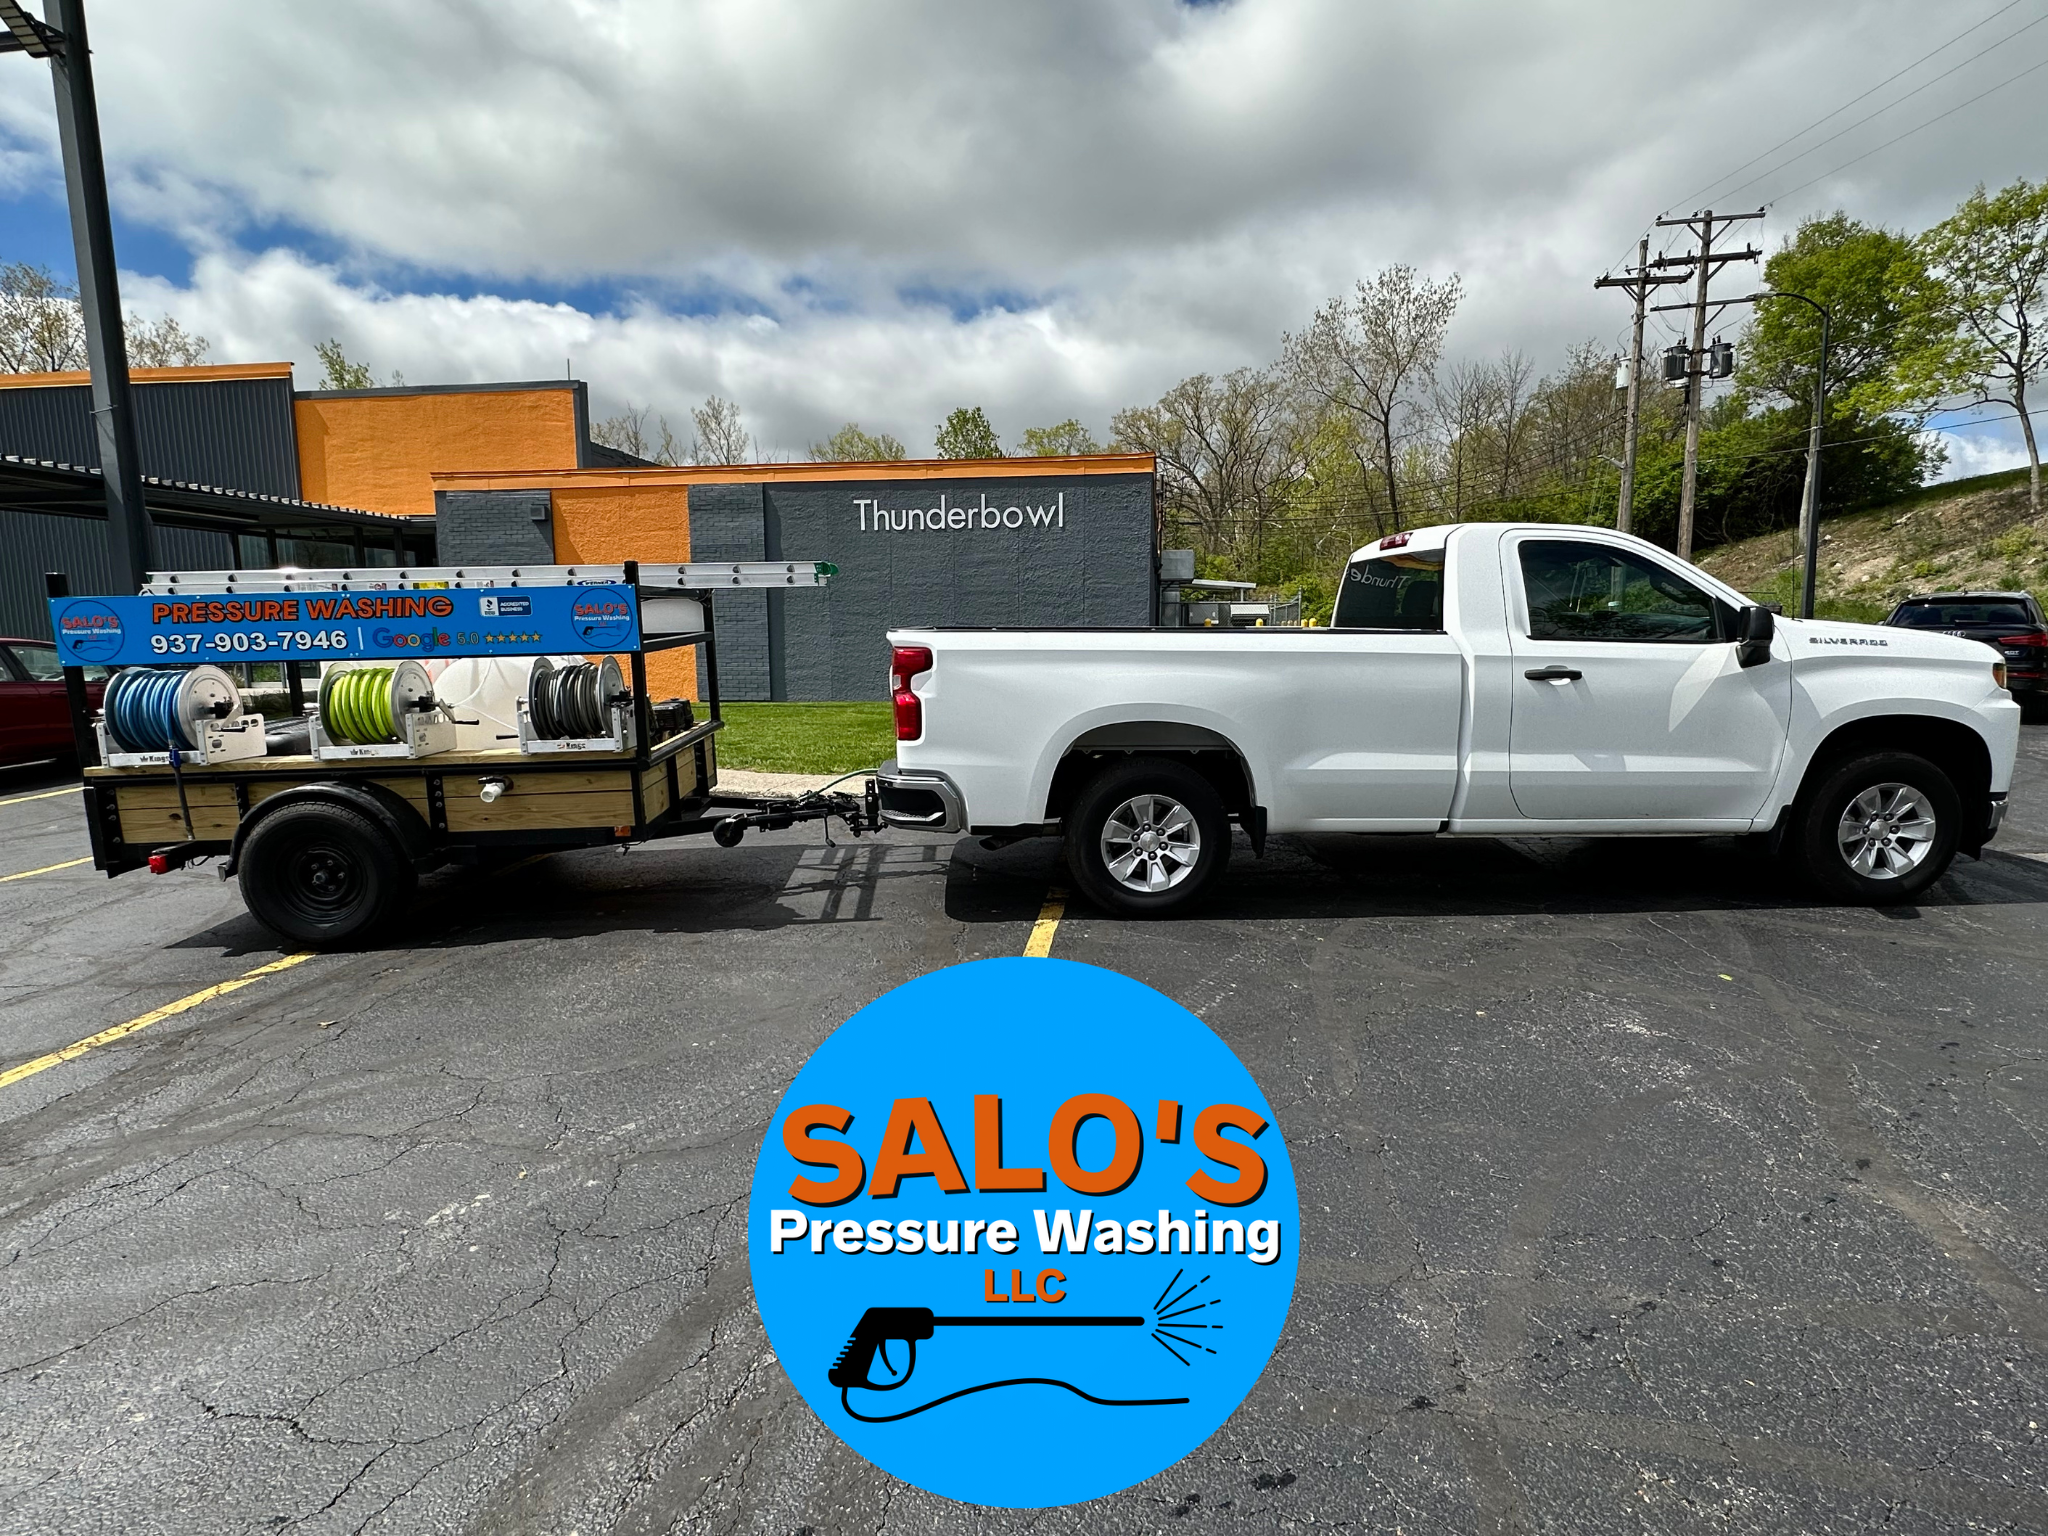 Commercial Pressure Washing and Exterior Building Washing at Thunderbowl Lanes in Dayton, OH